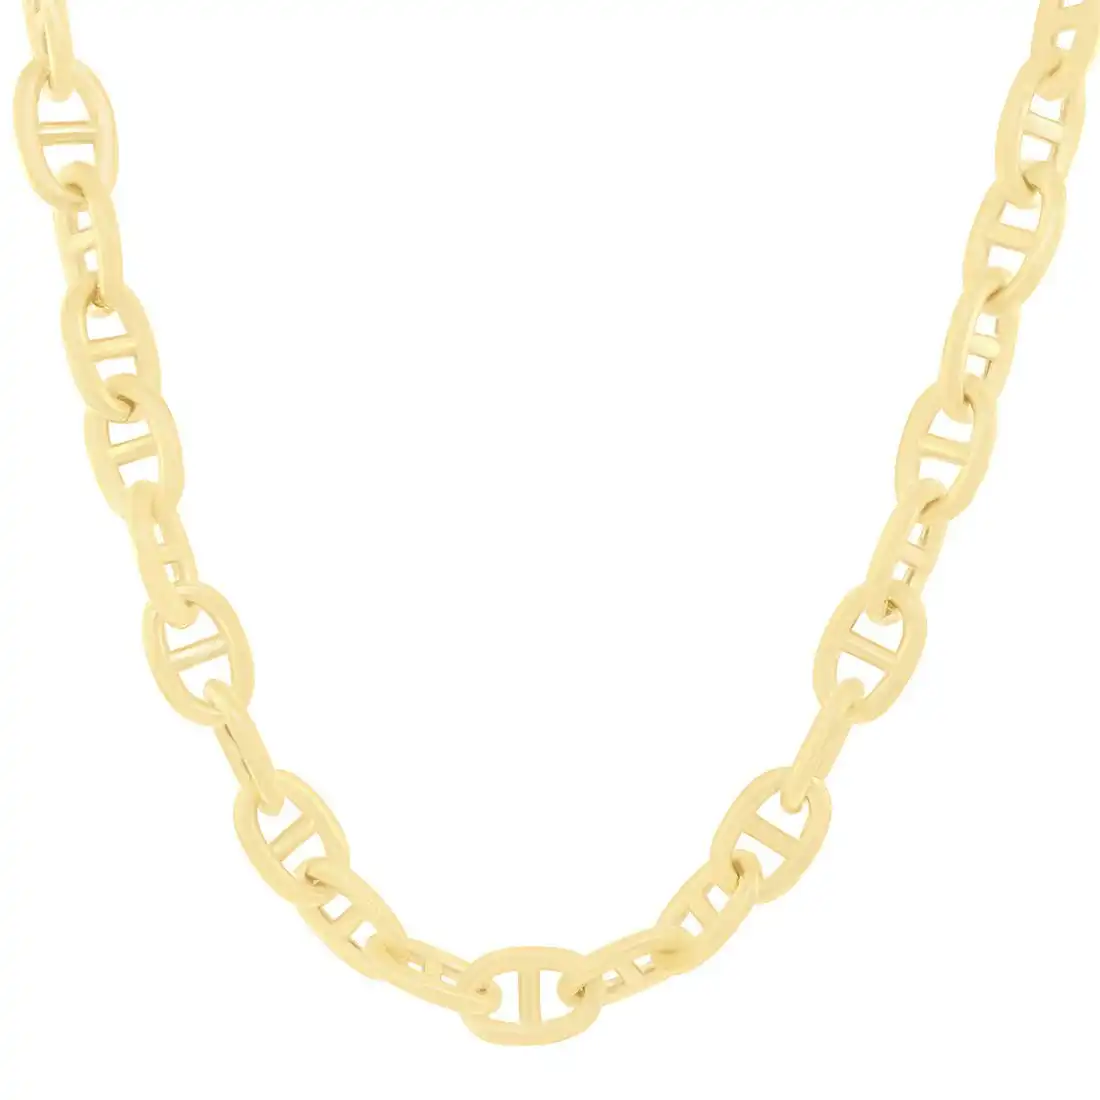 Rounded Mariner Necklace in 9ct Yellow Gold Infusion 45cm